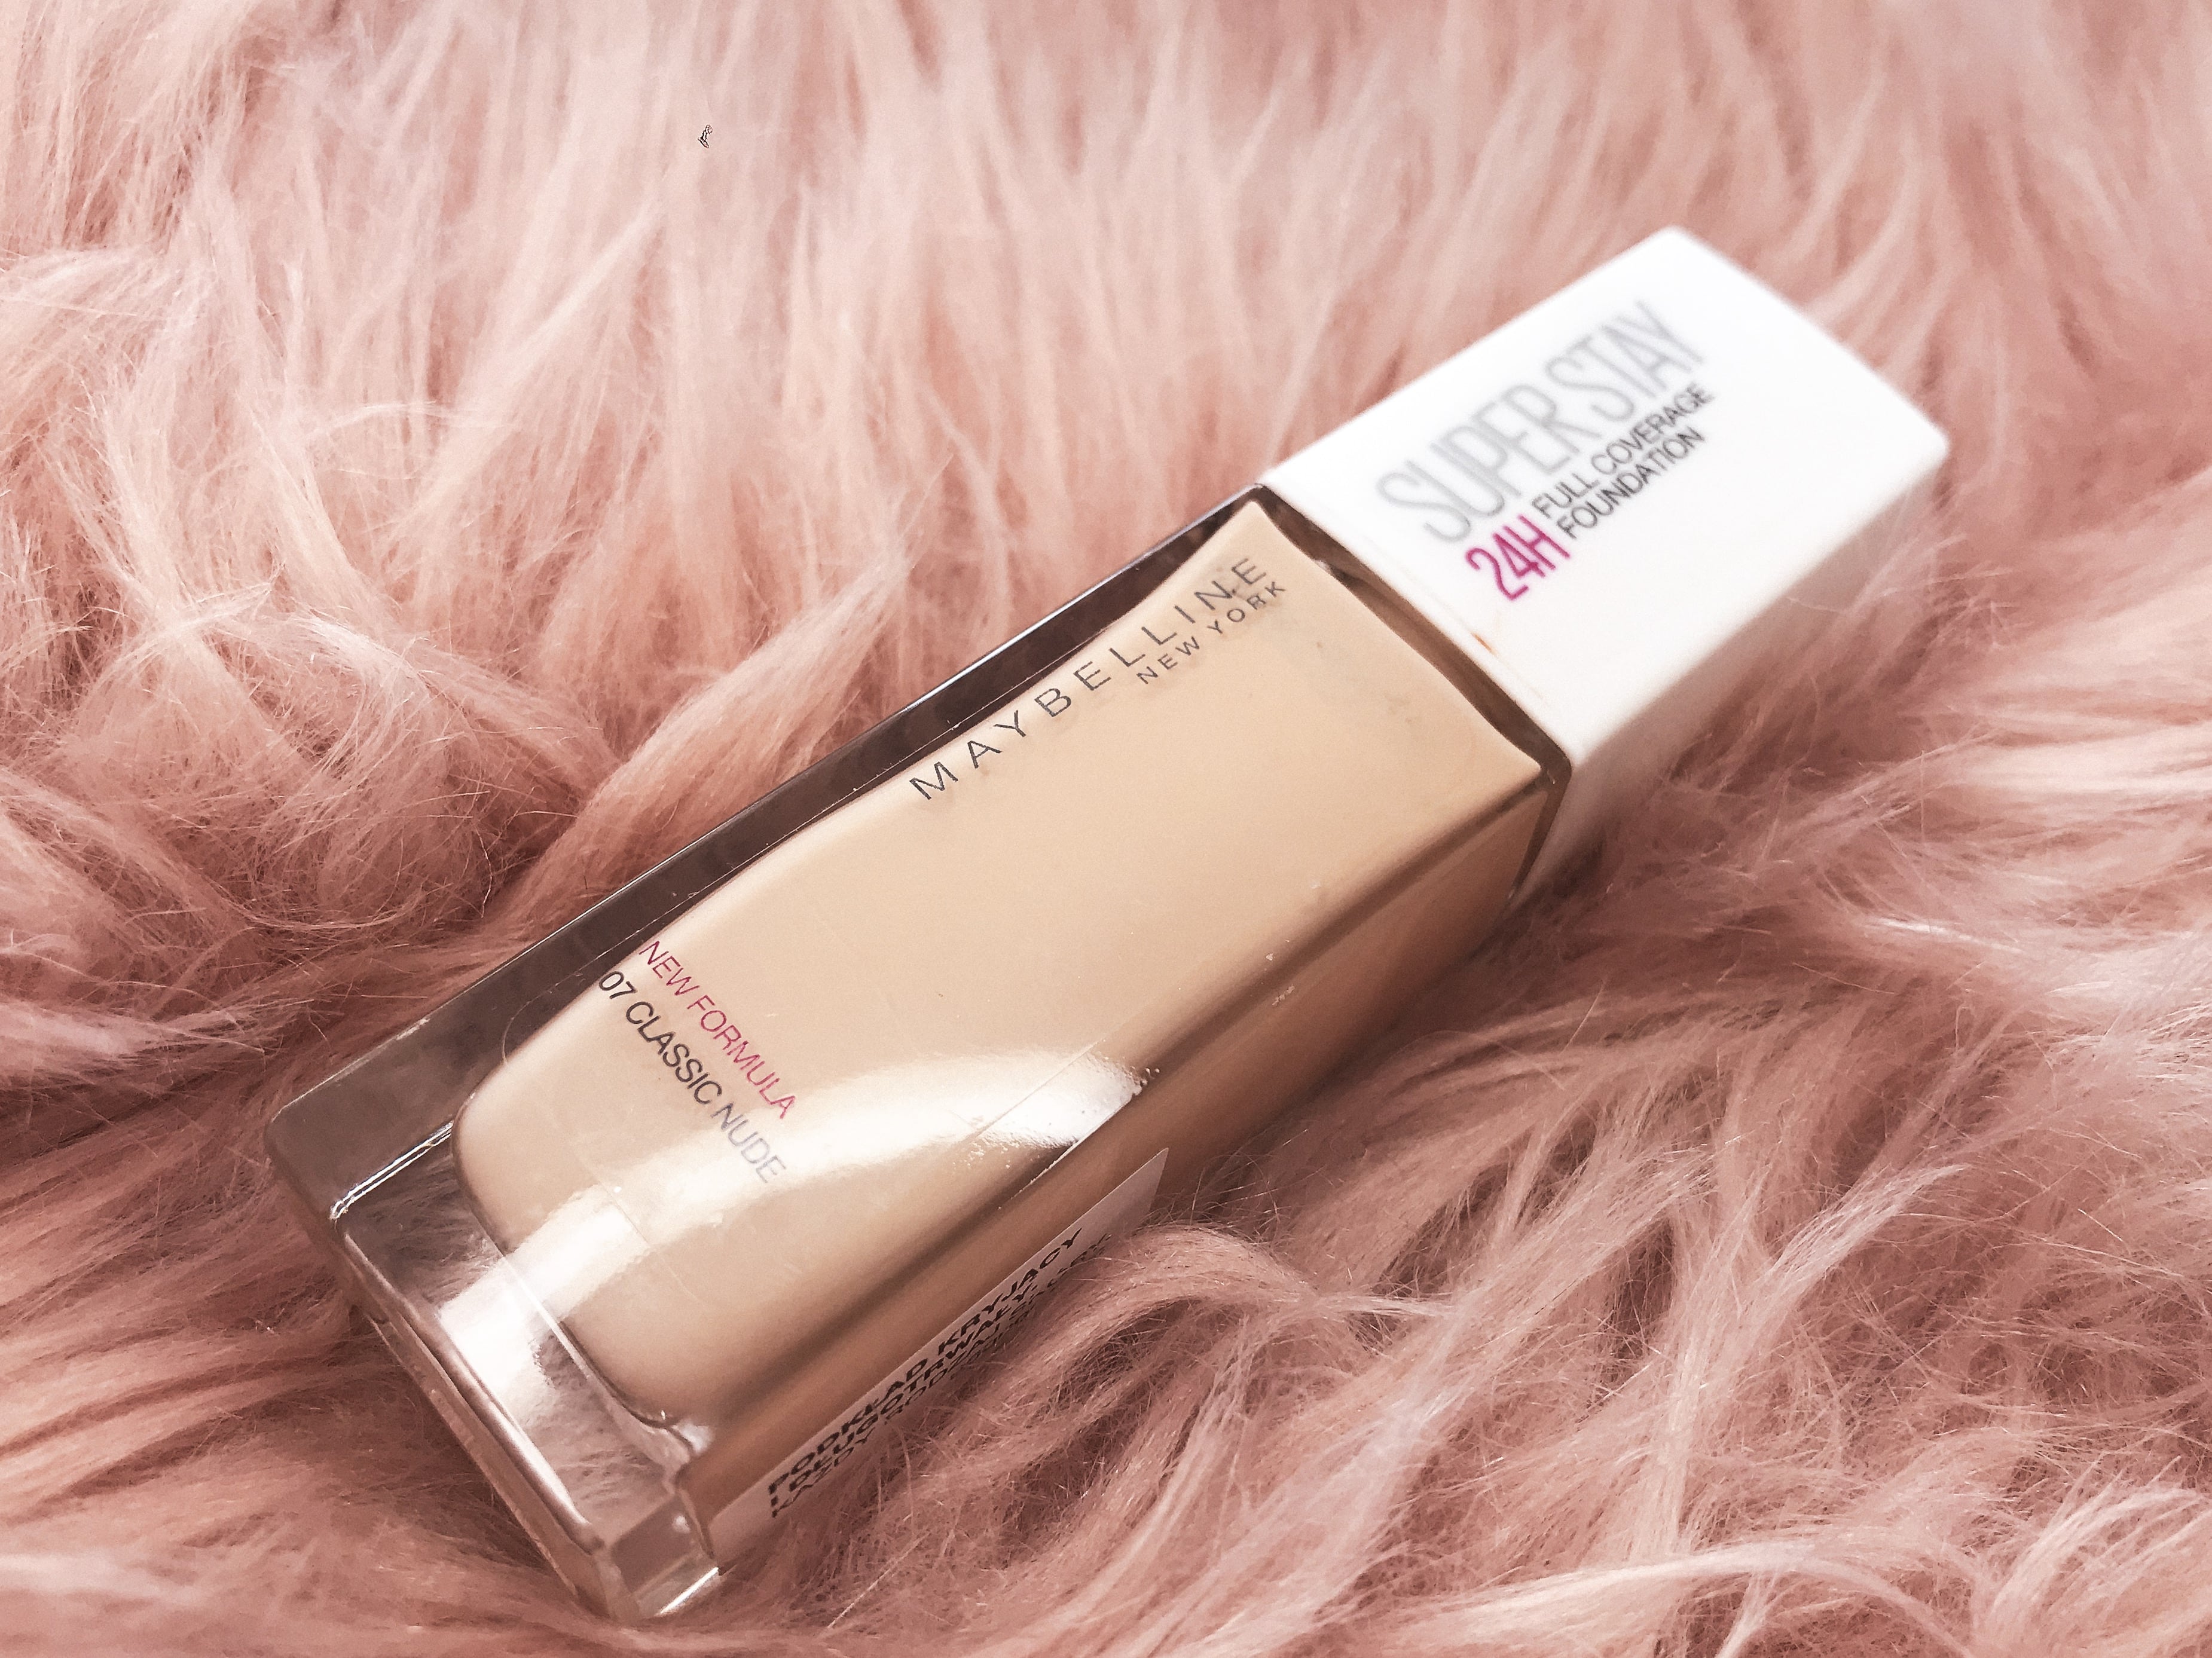 Maybelline super stay